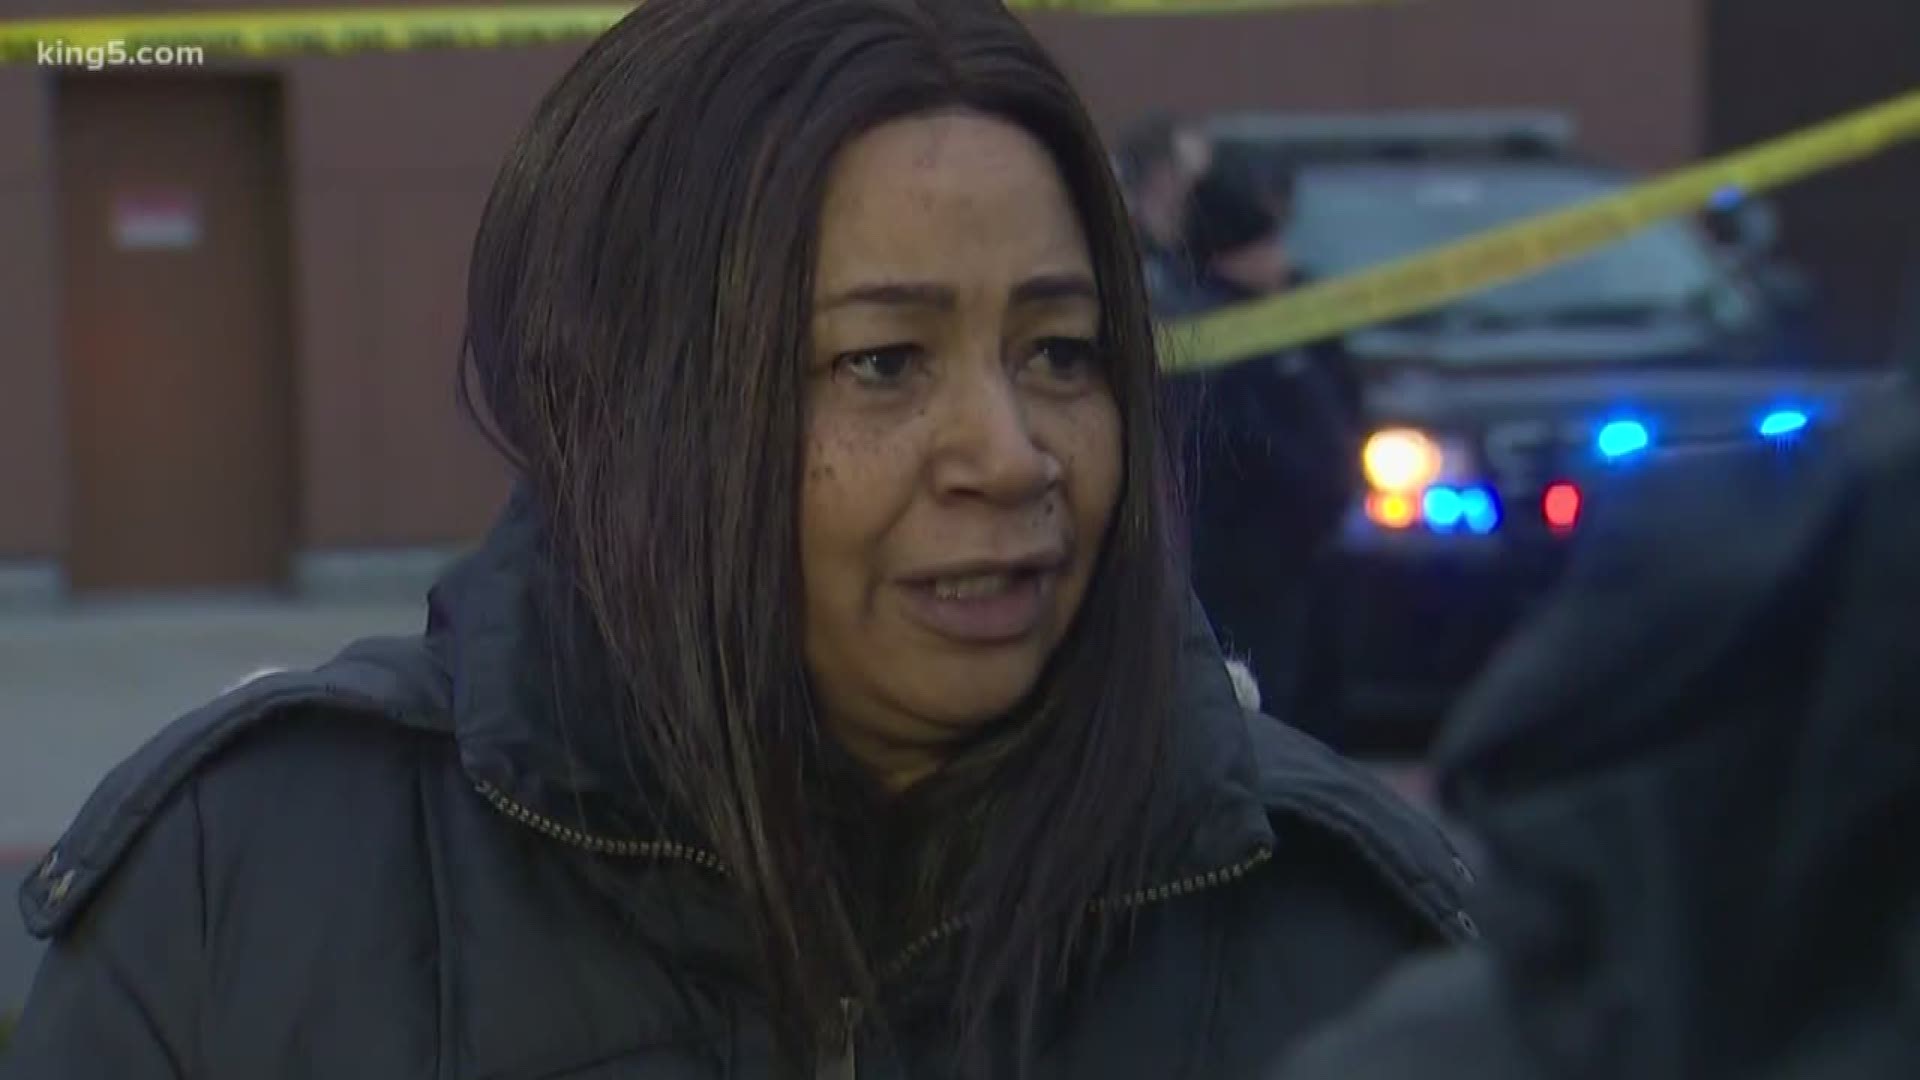 16-year-old killed in shooting outside Renton Walmart. His grieving grandmother spoke from the scene.